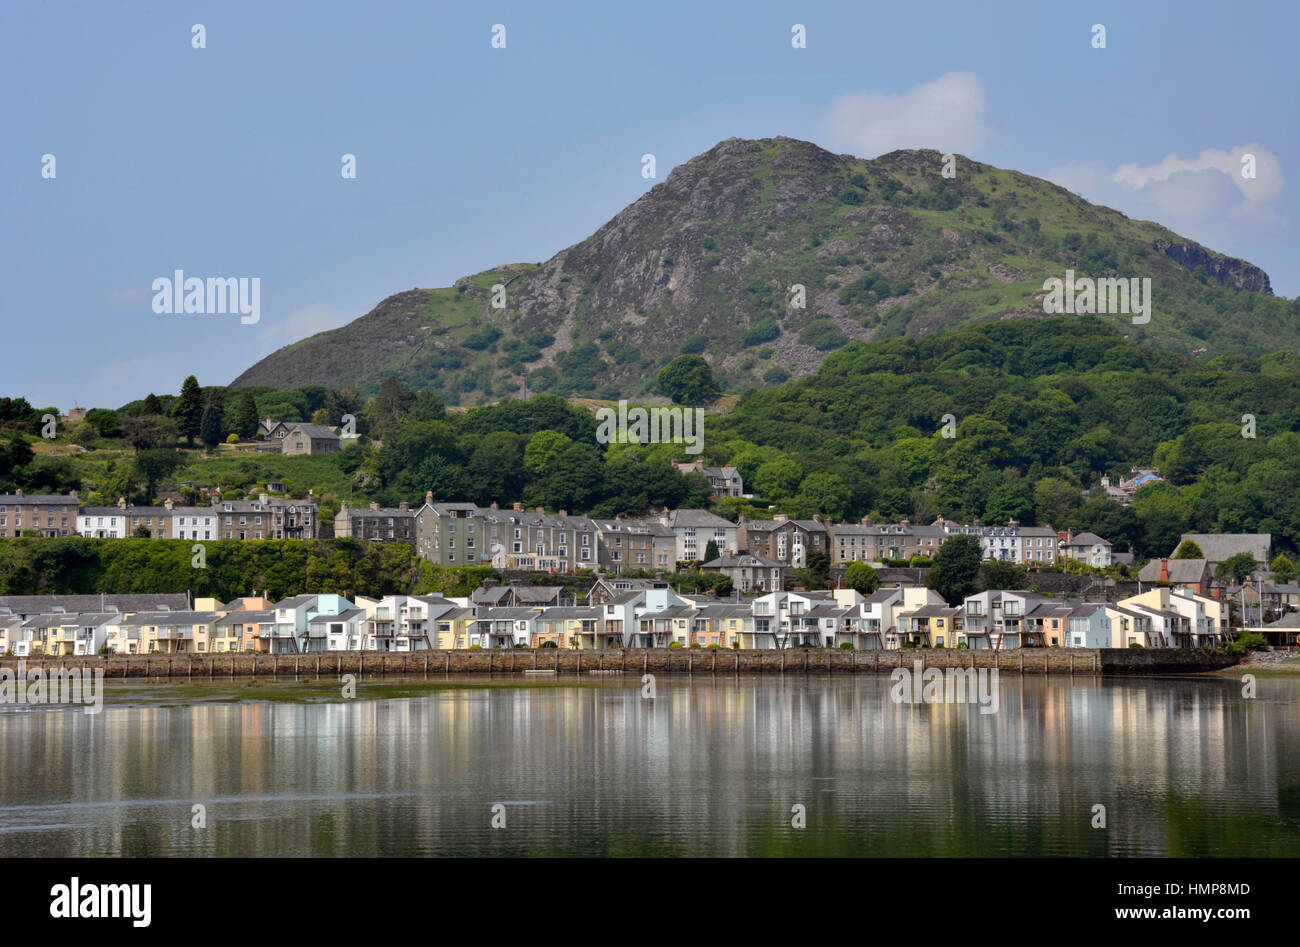 Porthmadog harbour with overlooking houses and the hill Moel-Y-Gest beyond in Wales. UK. Stock Photo